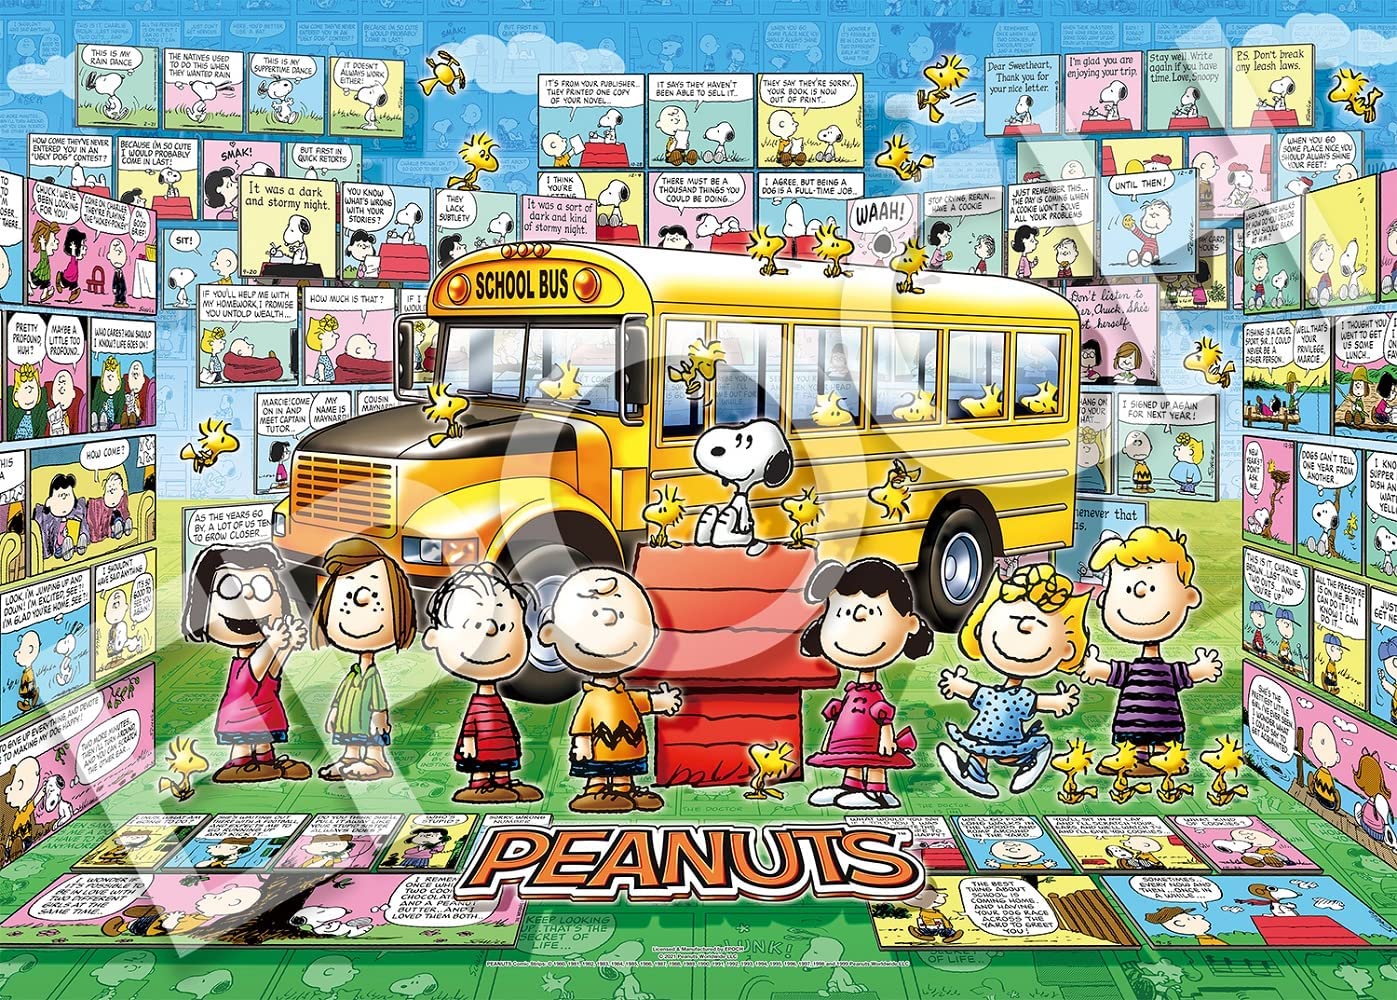 26x38cm Snoopy in Japan 1053 Piece Jigsaw Puzzle  EPOCH F/S from Japan NEW 